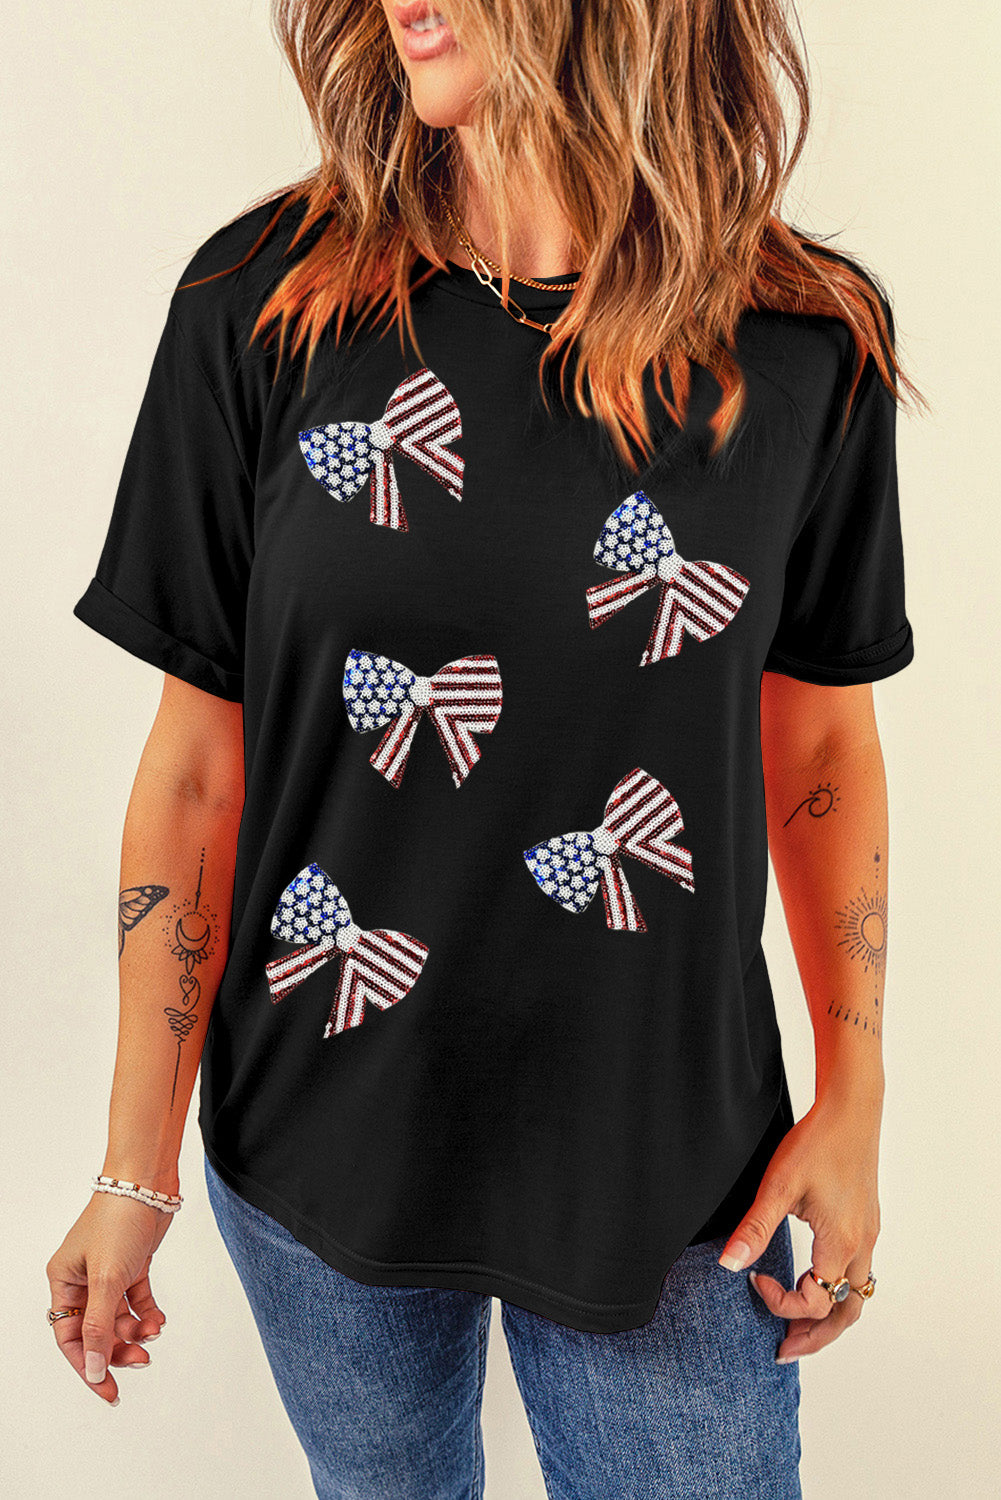 Explore More Collection - US Flag Round Neck Short Sleeve T-Shirt